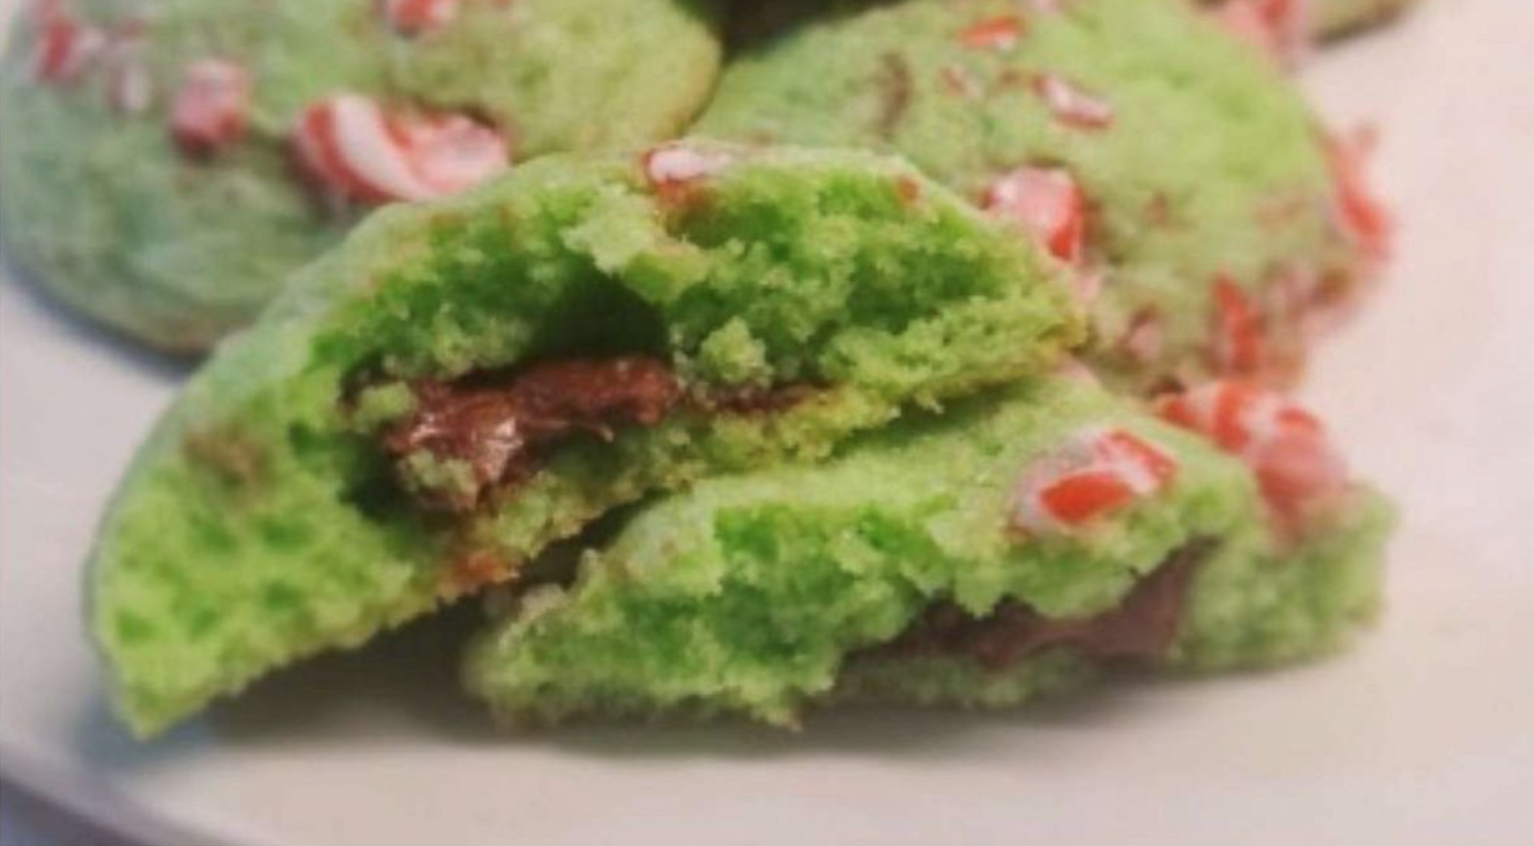 Melty Chocolate Peppermint “Grinch” Cookies